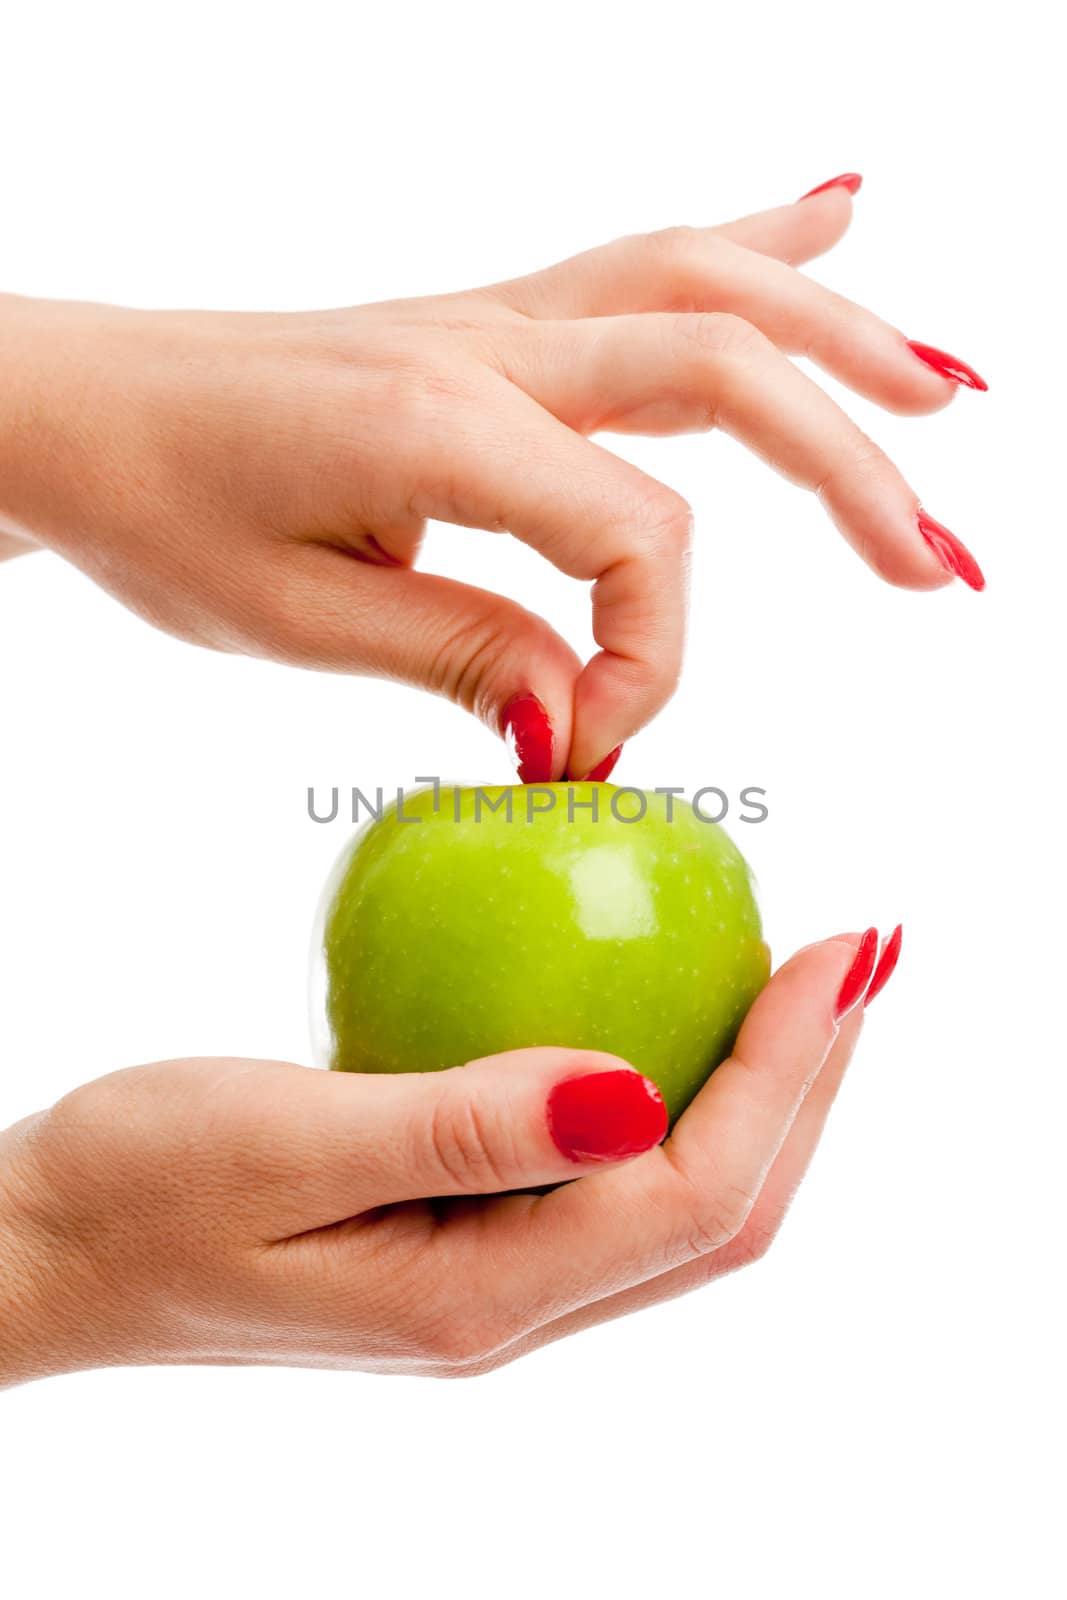 Female hands holding an apple on white background